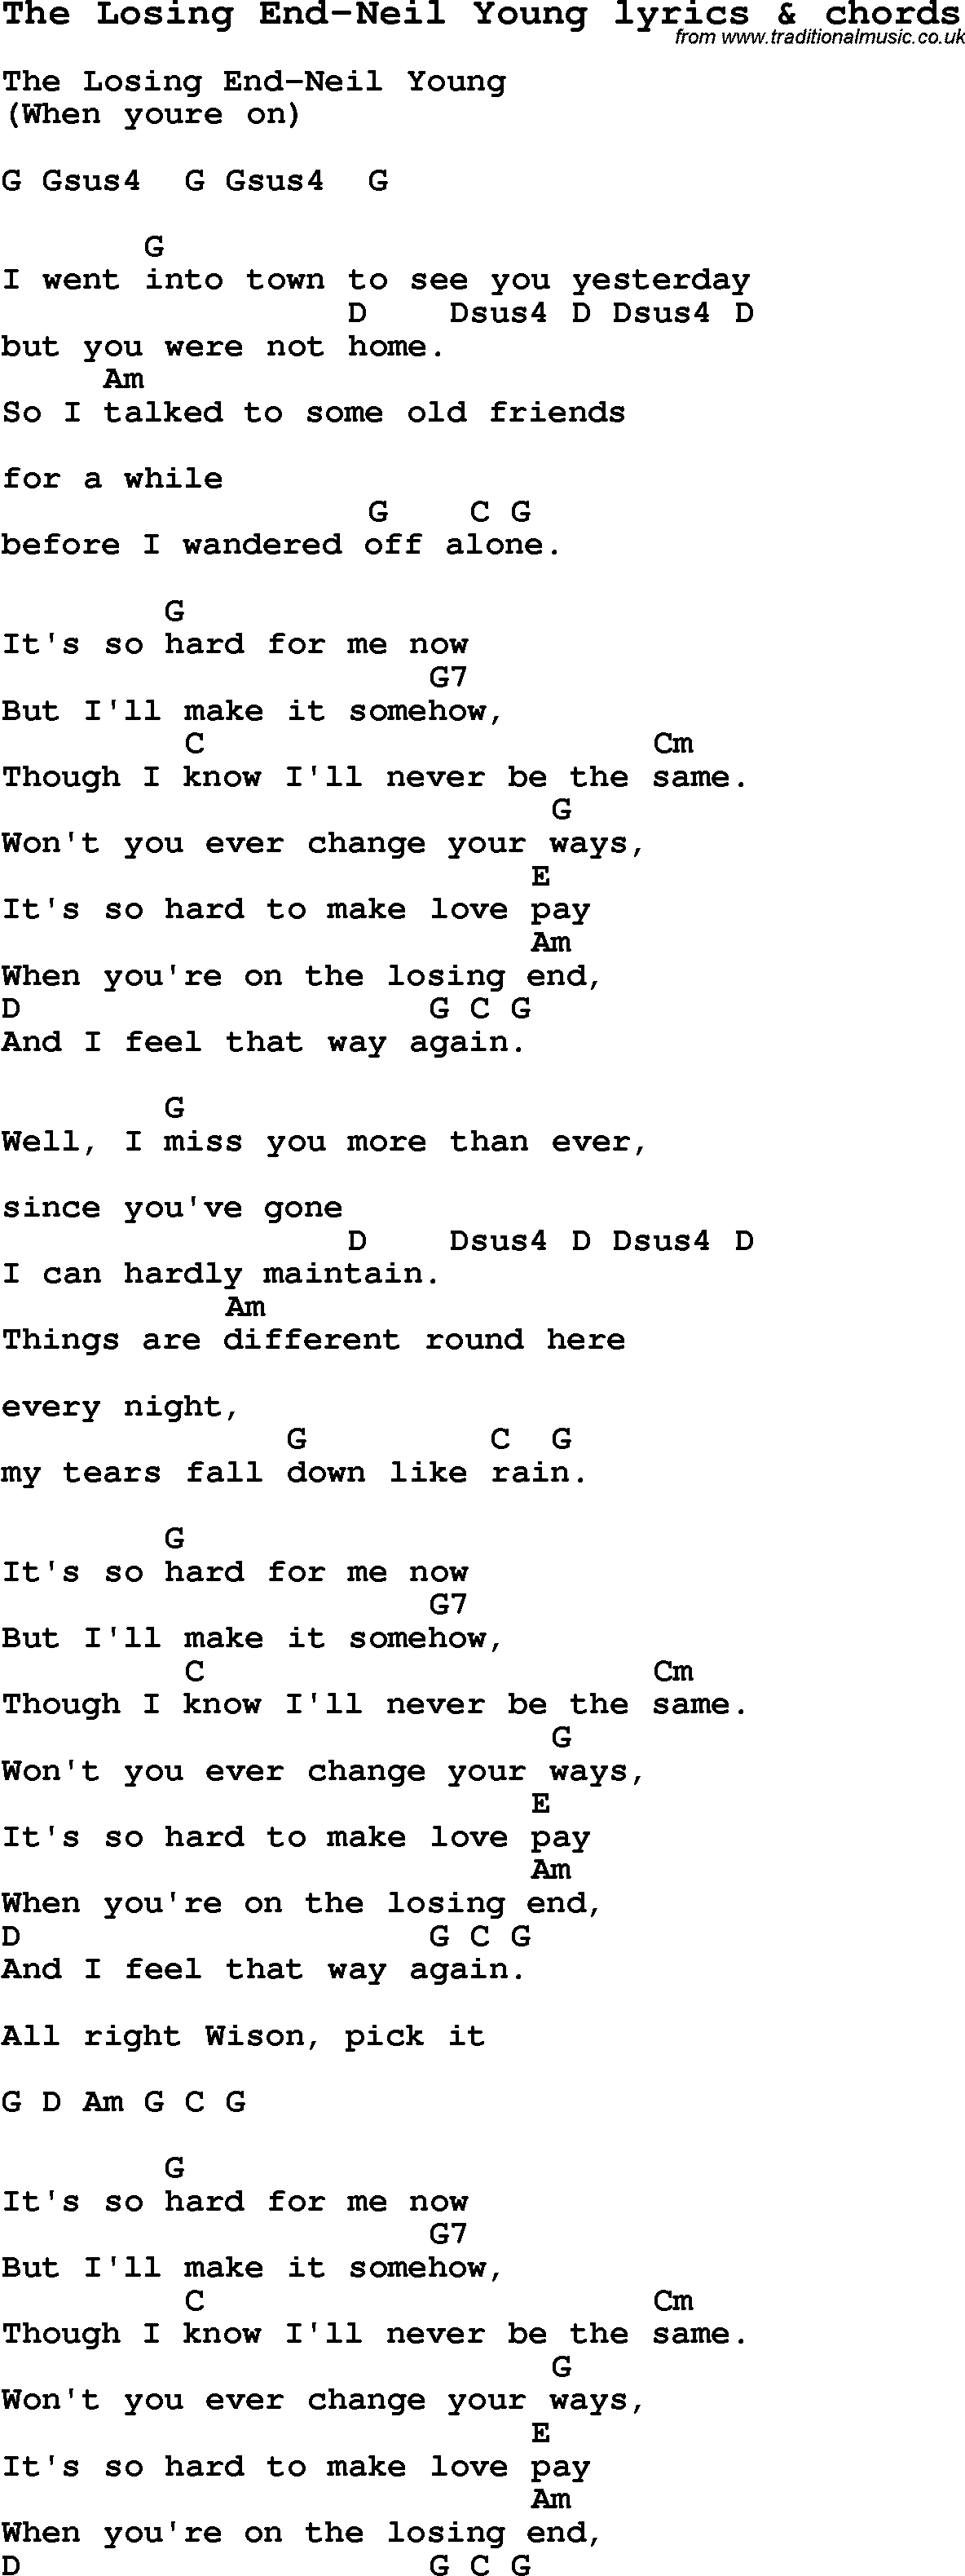 Love Song Lyrics for: The Losing End-Neil Young with chords for Ukulele, Guitar Banjo etc.